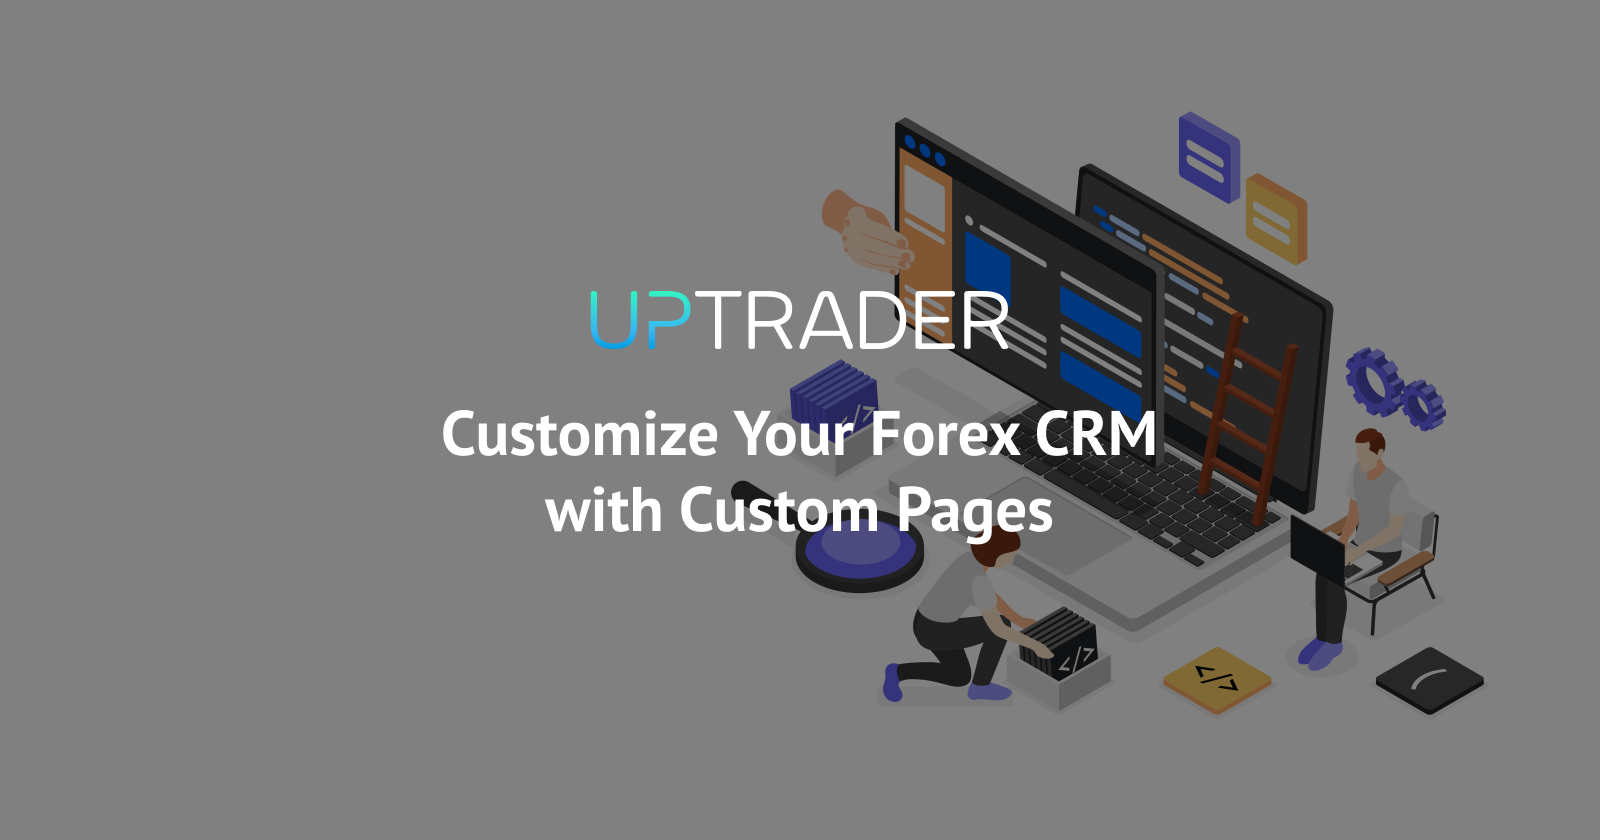 Customize Your Clients' Experience with Custom Pages in Forex CRM